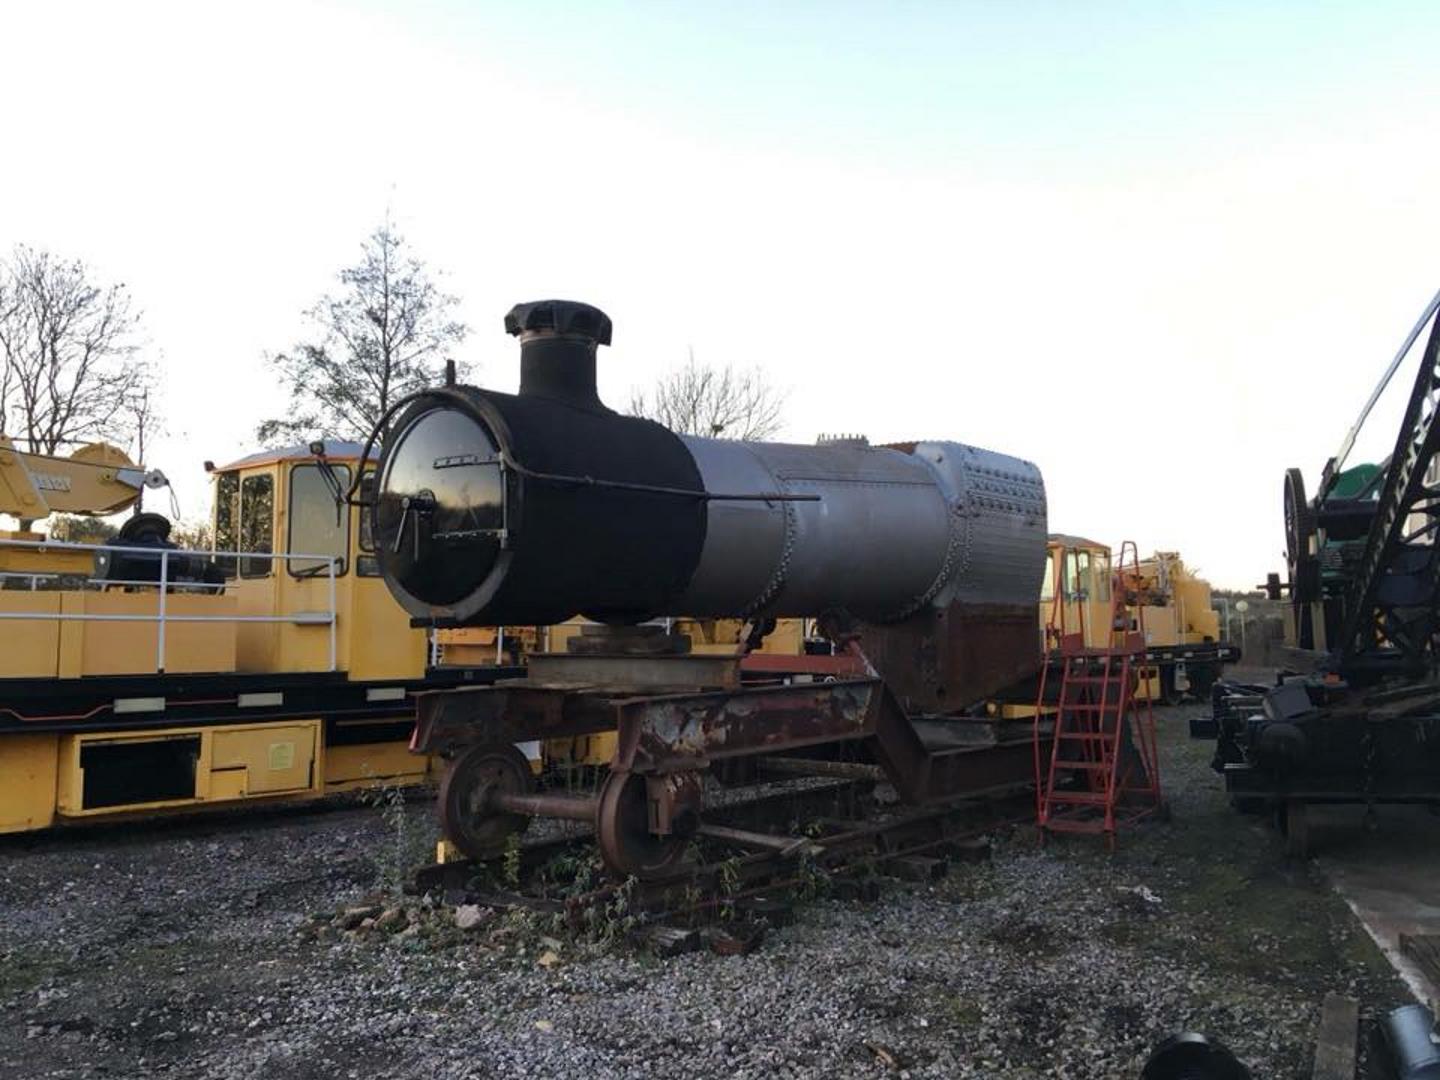 6695's Boiler ready for the move to the Flour Mill // Credit 6695 Loco Group FB Page